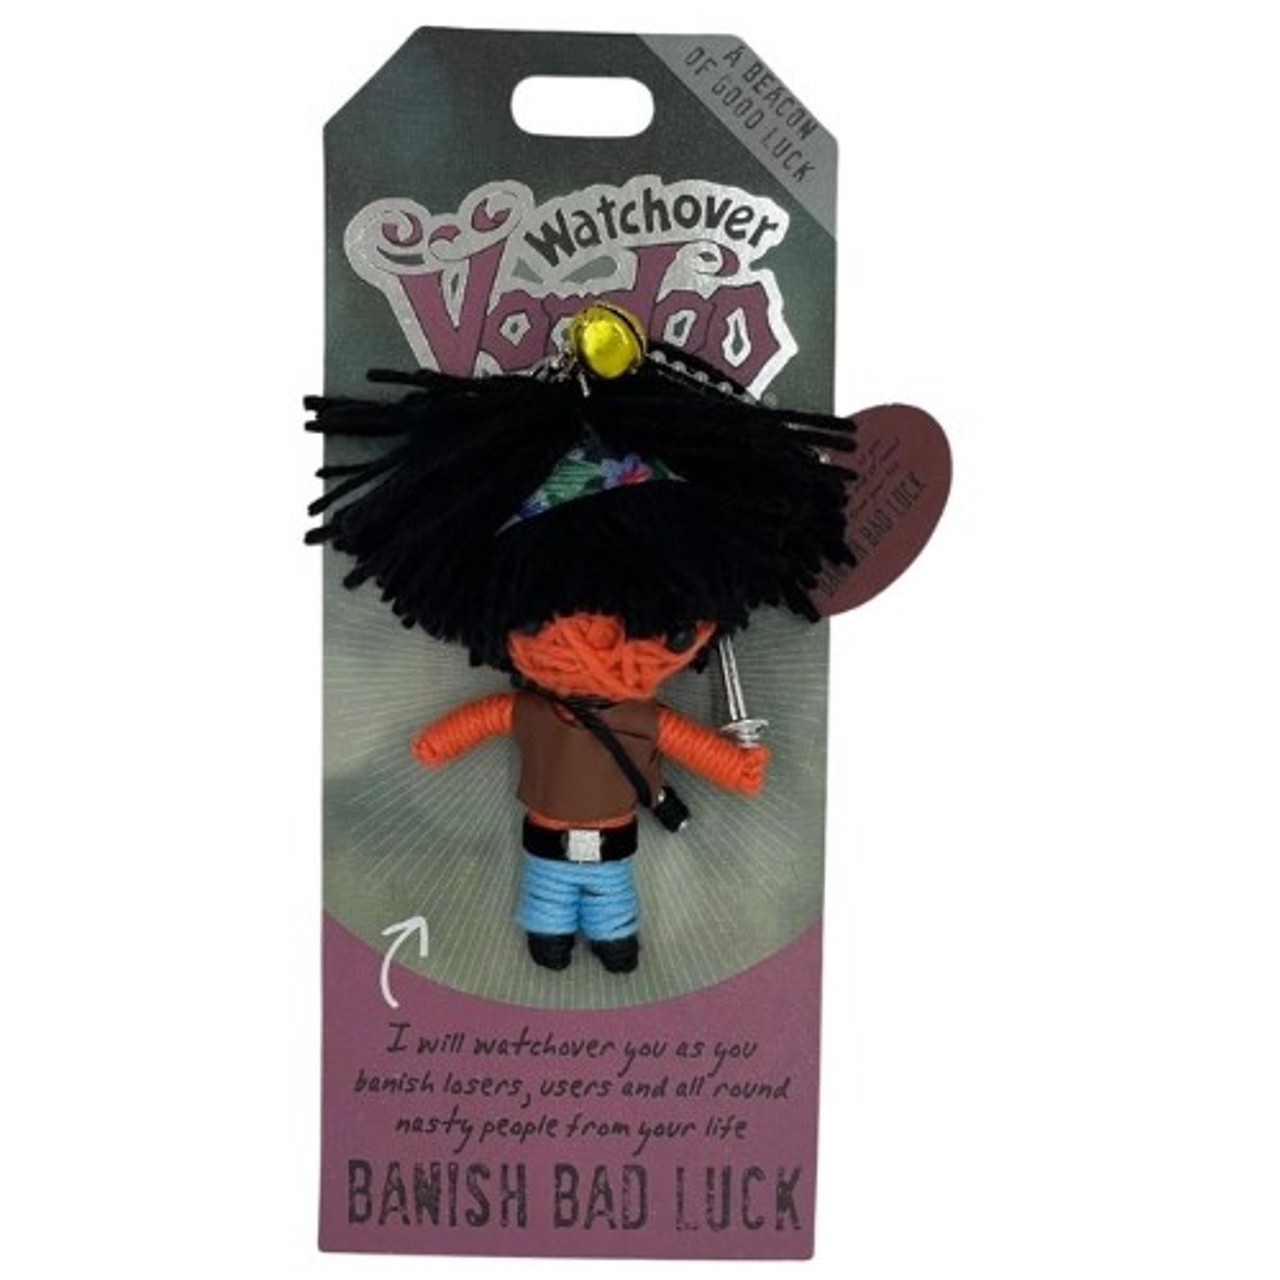 Watchover Voodoo Doll Keychains - Select